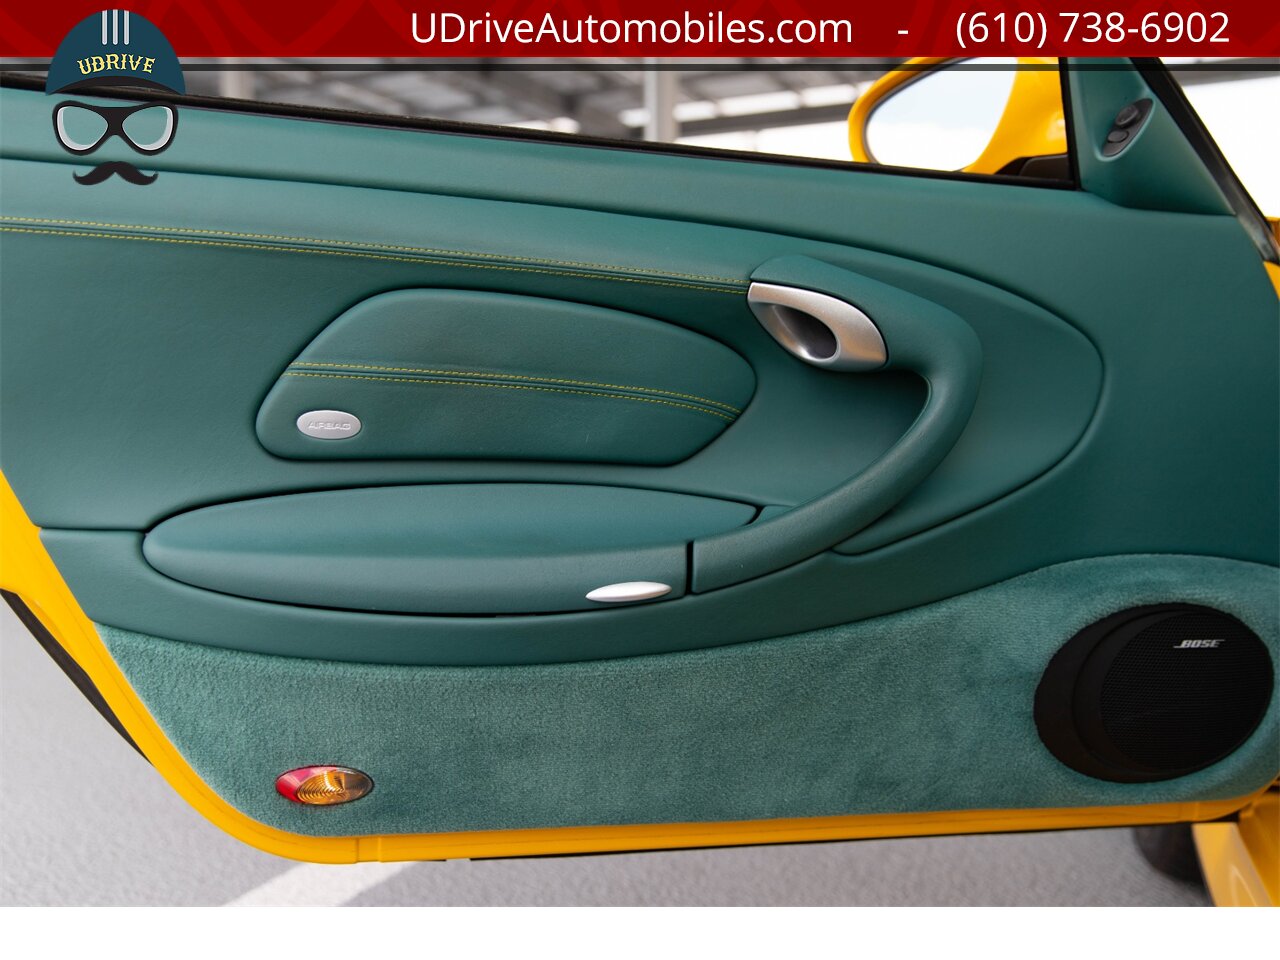 2003 Porsche 911 996 Turbo X50 6Sp Nephrite Green Lthr 9k Miles  Deviating Yellow Stitching Collector Grade BACK AGAIN - Photo 23 - West Chester, PA 19382